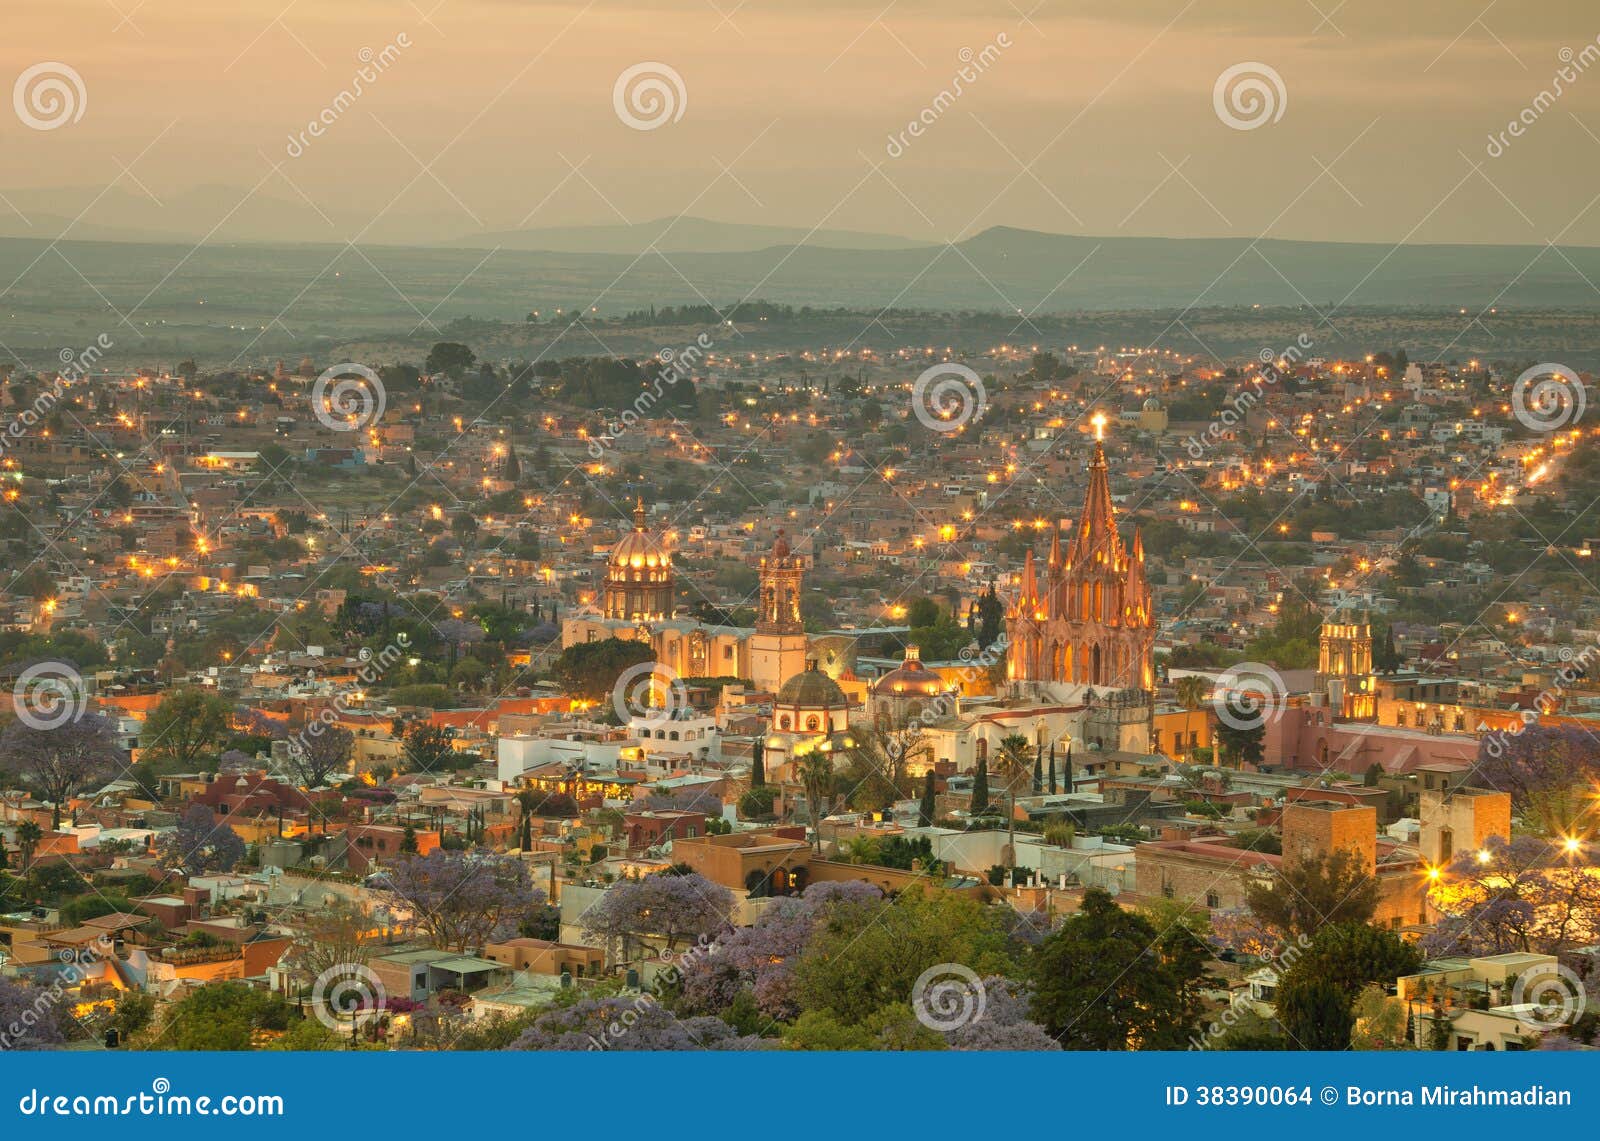 skyline of san miguel de allende in mexico after sunset